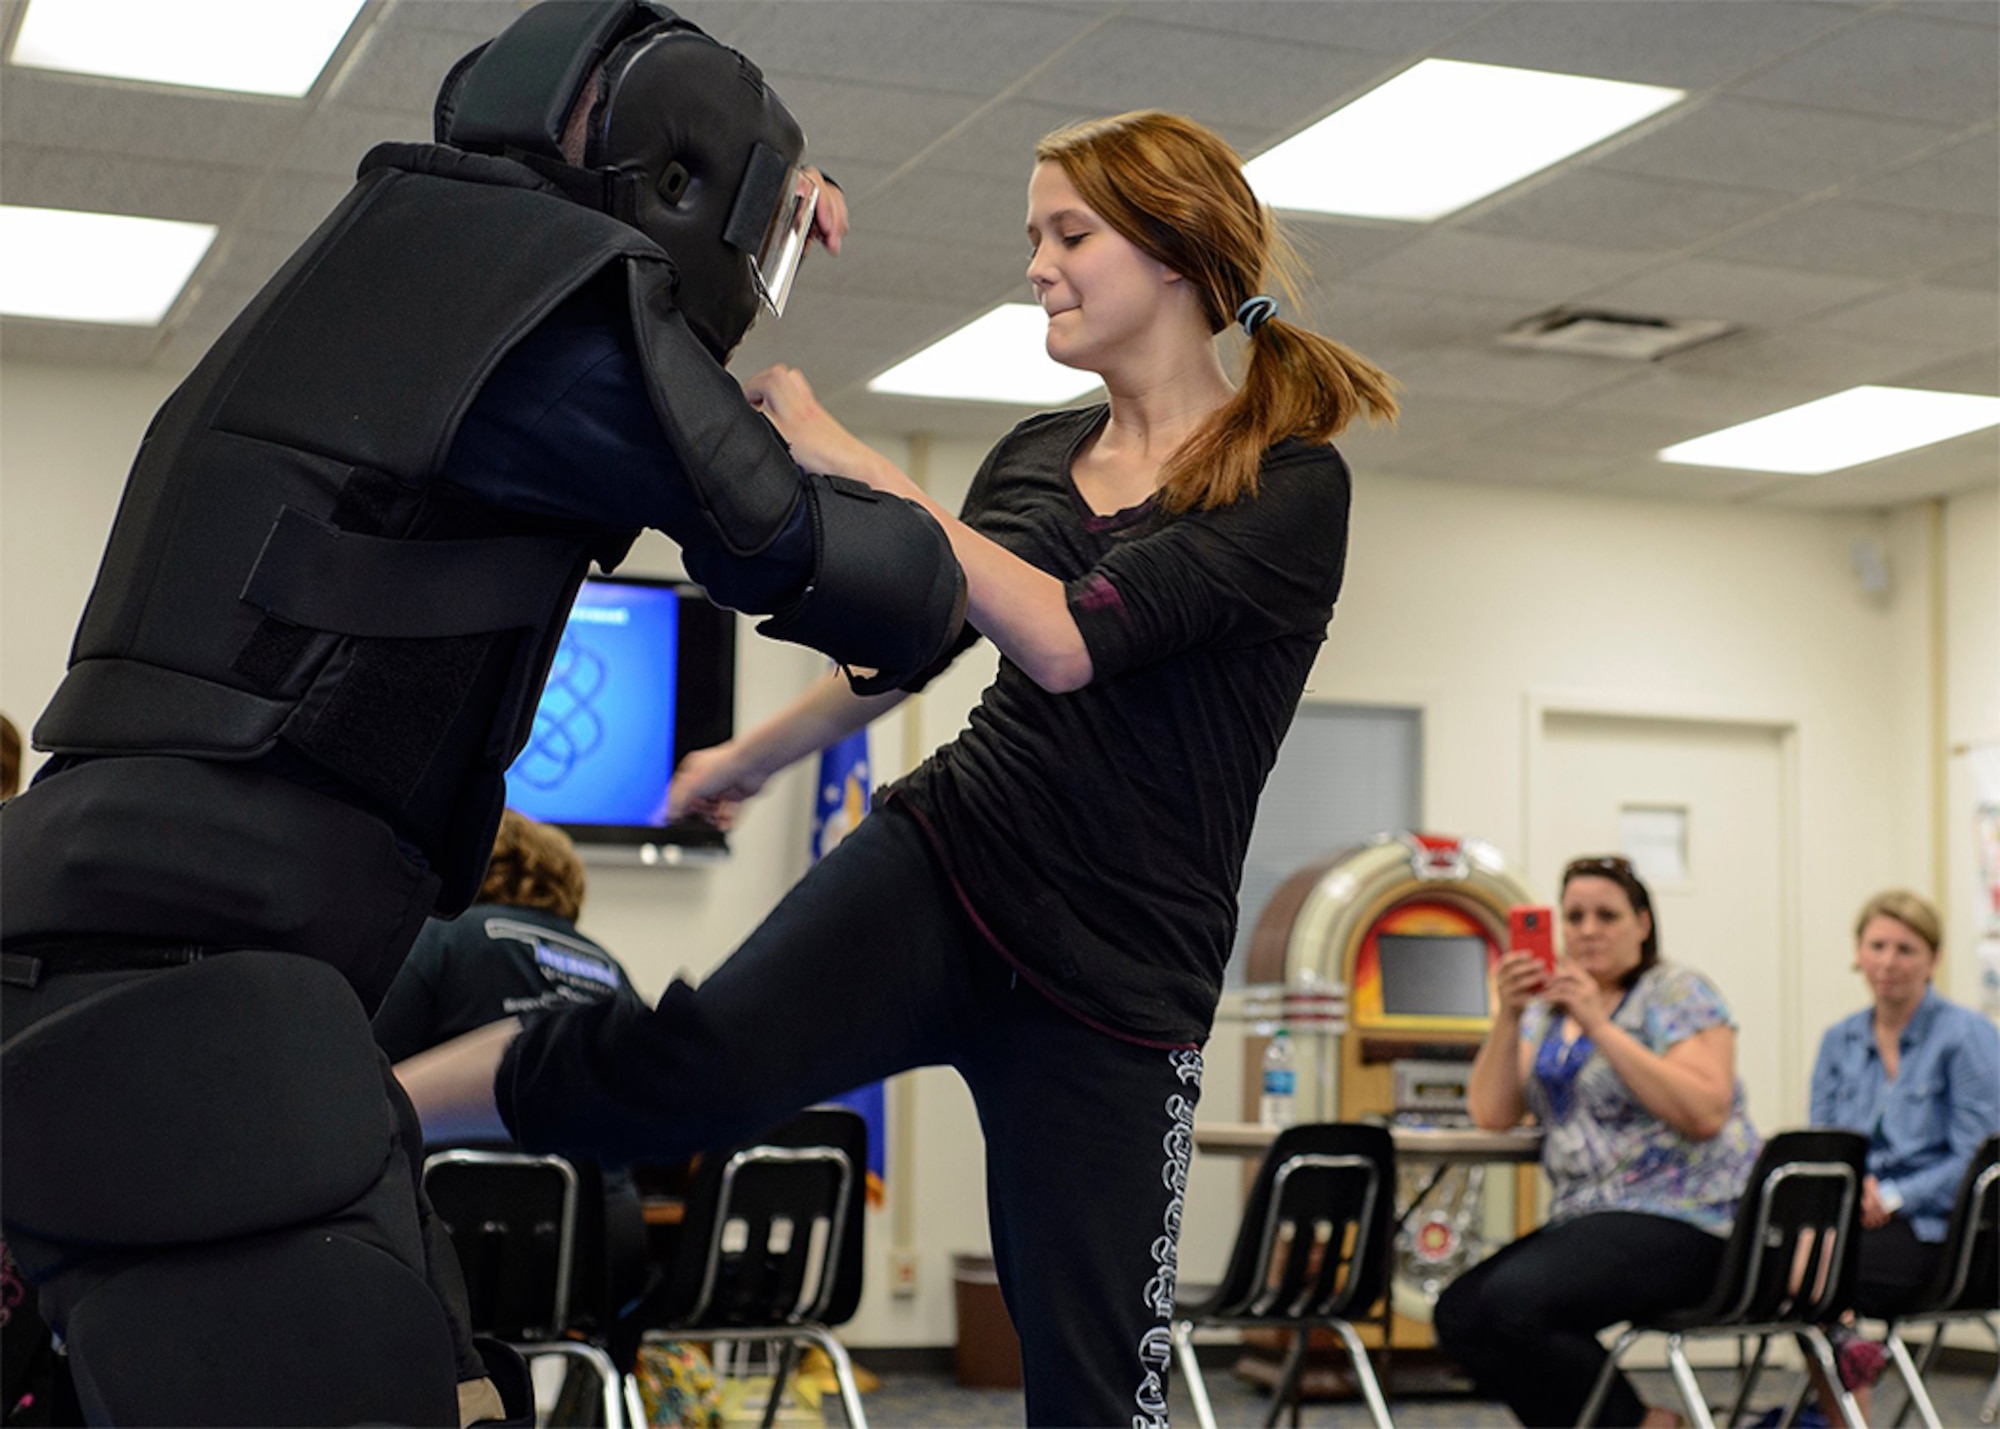 Camy Shearon fights off a suited instructor during an installment of "My Body... My Life…" at the Community Chapel Activity Center at Vance Air Force Base, Oklahoma, April 28. The course is designed to empower women "through awareness, education, violence prevention, and self-defense techniques." (U.S. Air Force photo / David Poe)
